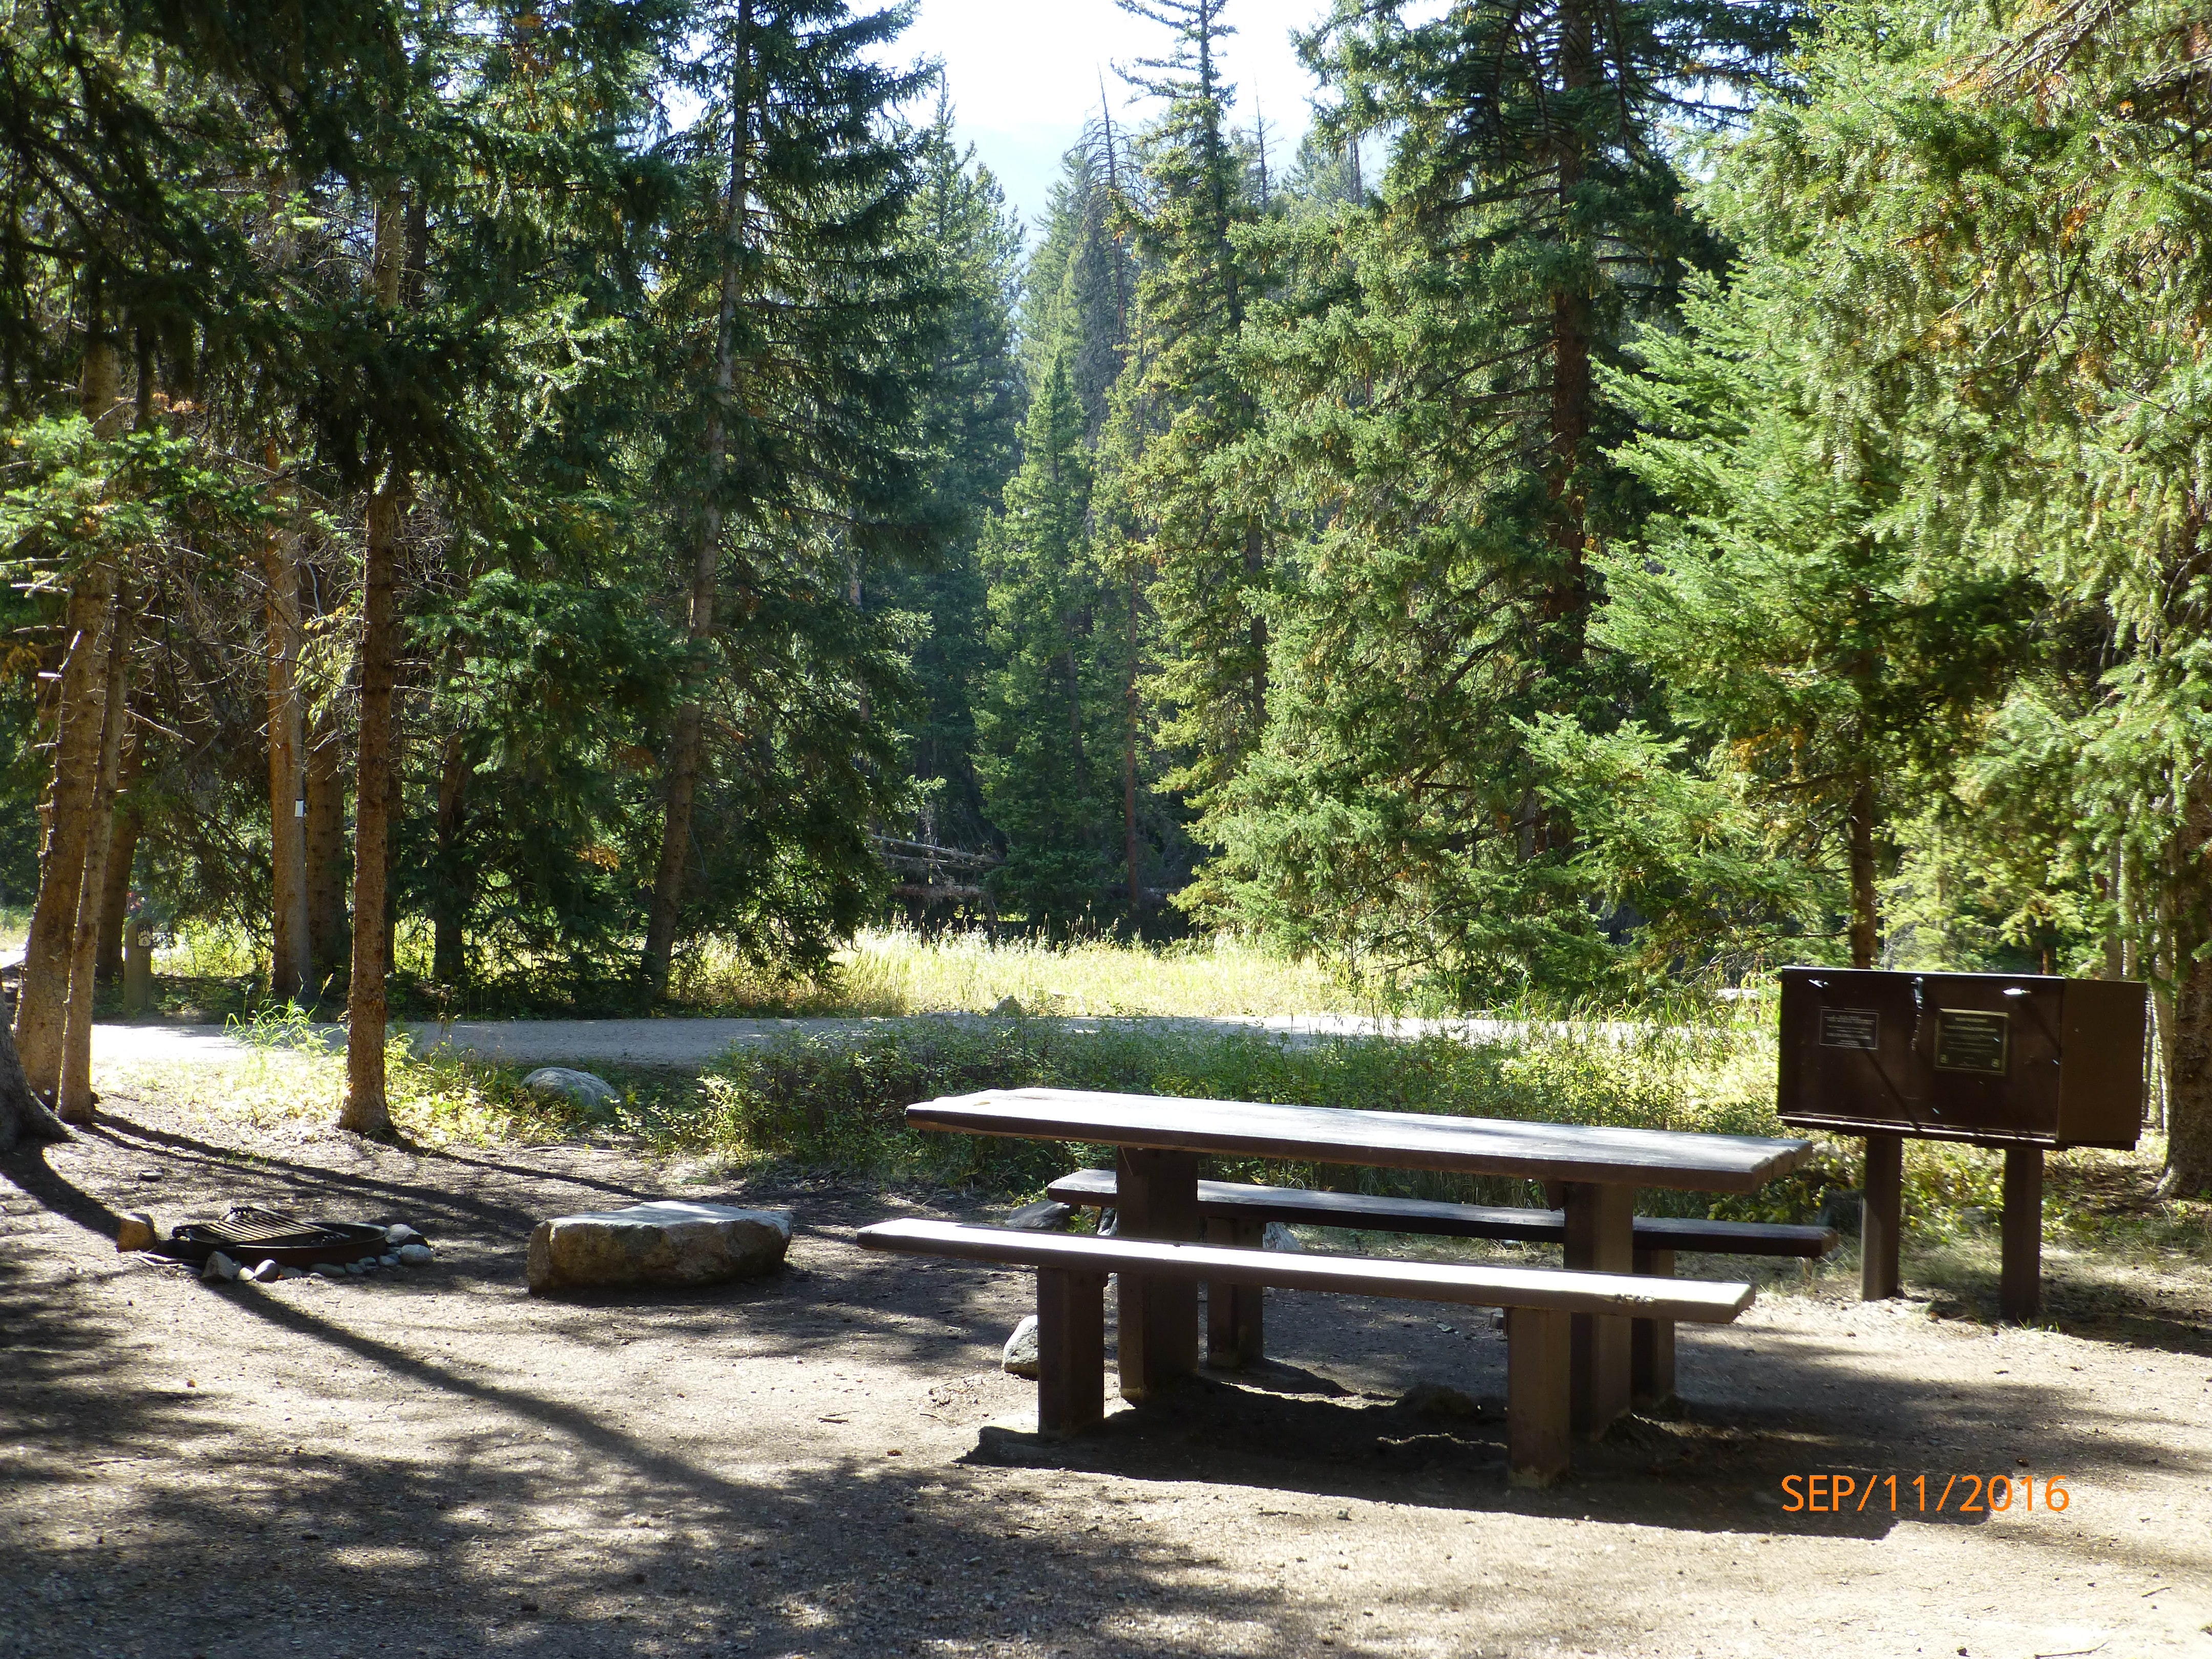 A typical spacious site showing fire ring, table, and metal bear box (on right side)